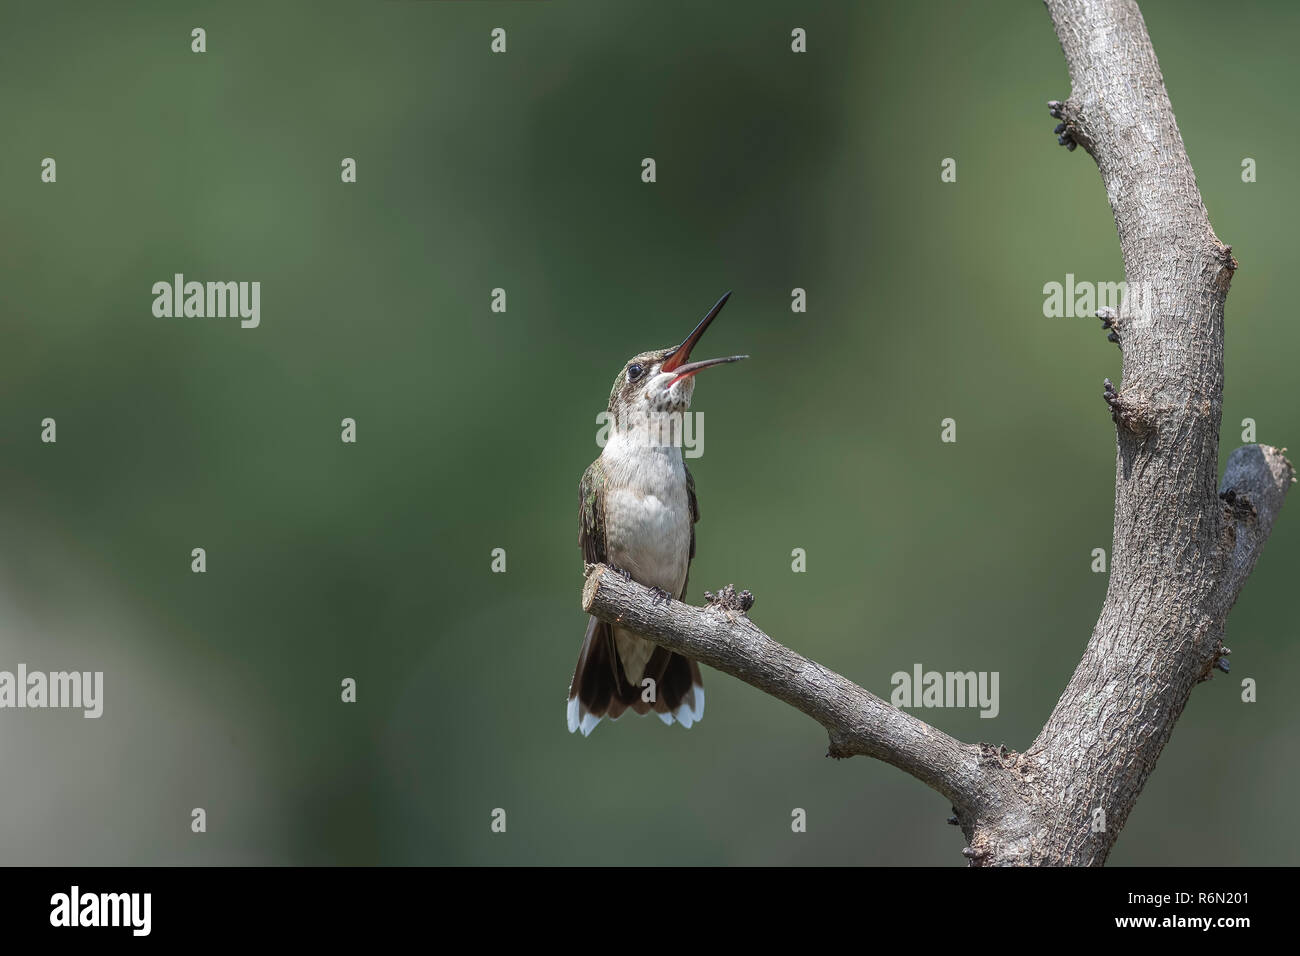 Hummingbird appears to be laughing. He's really ready to catch an insect in that wide open beak. Stock Photo